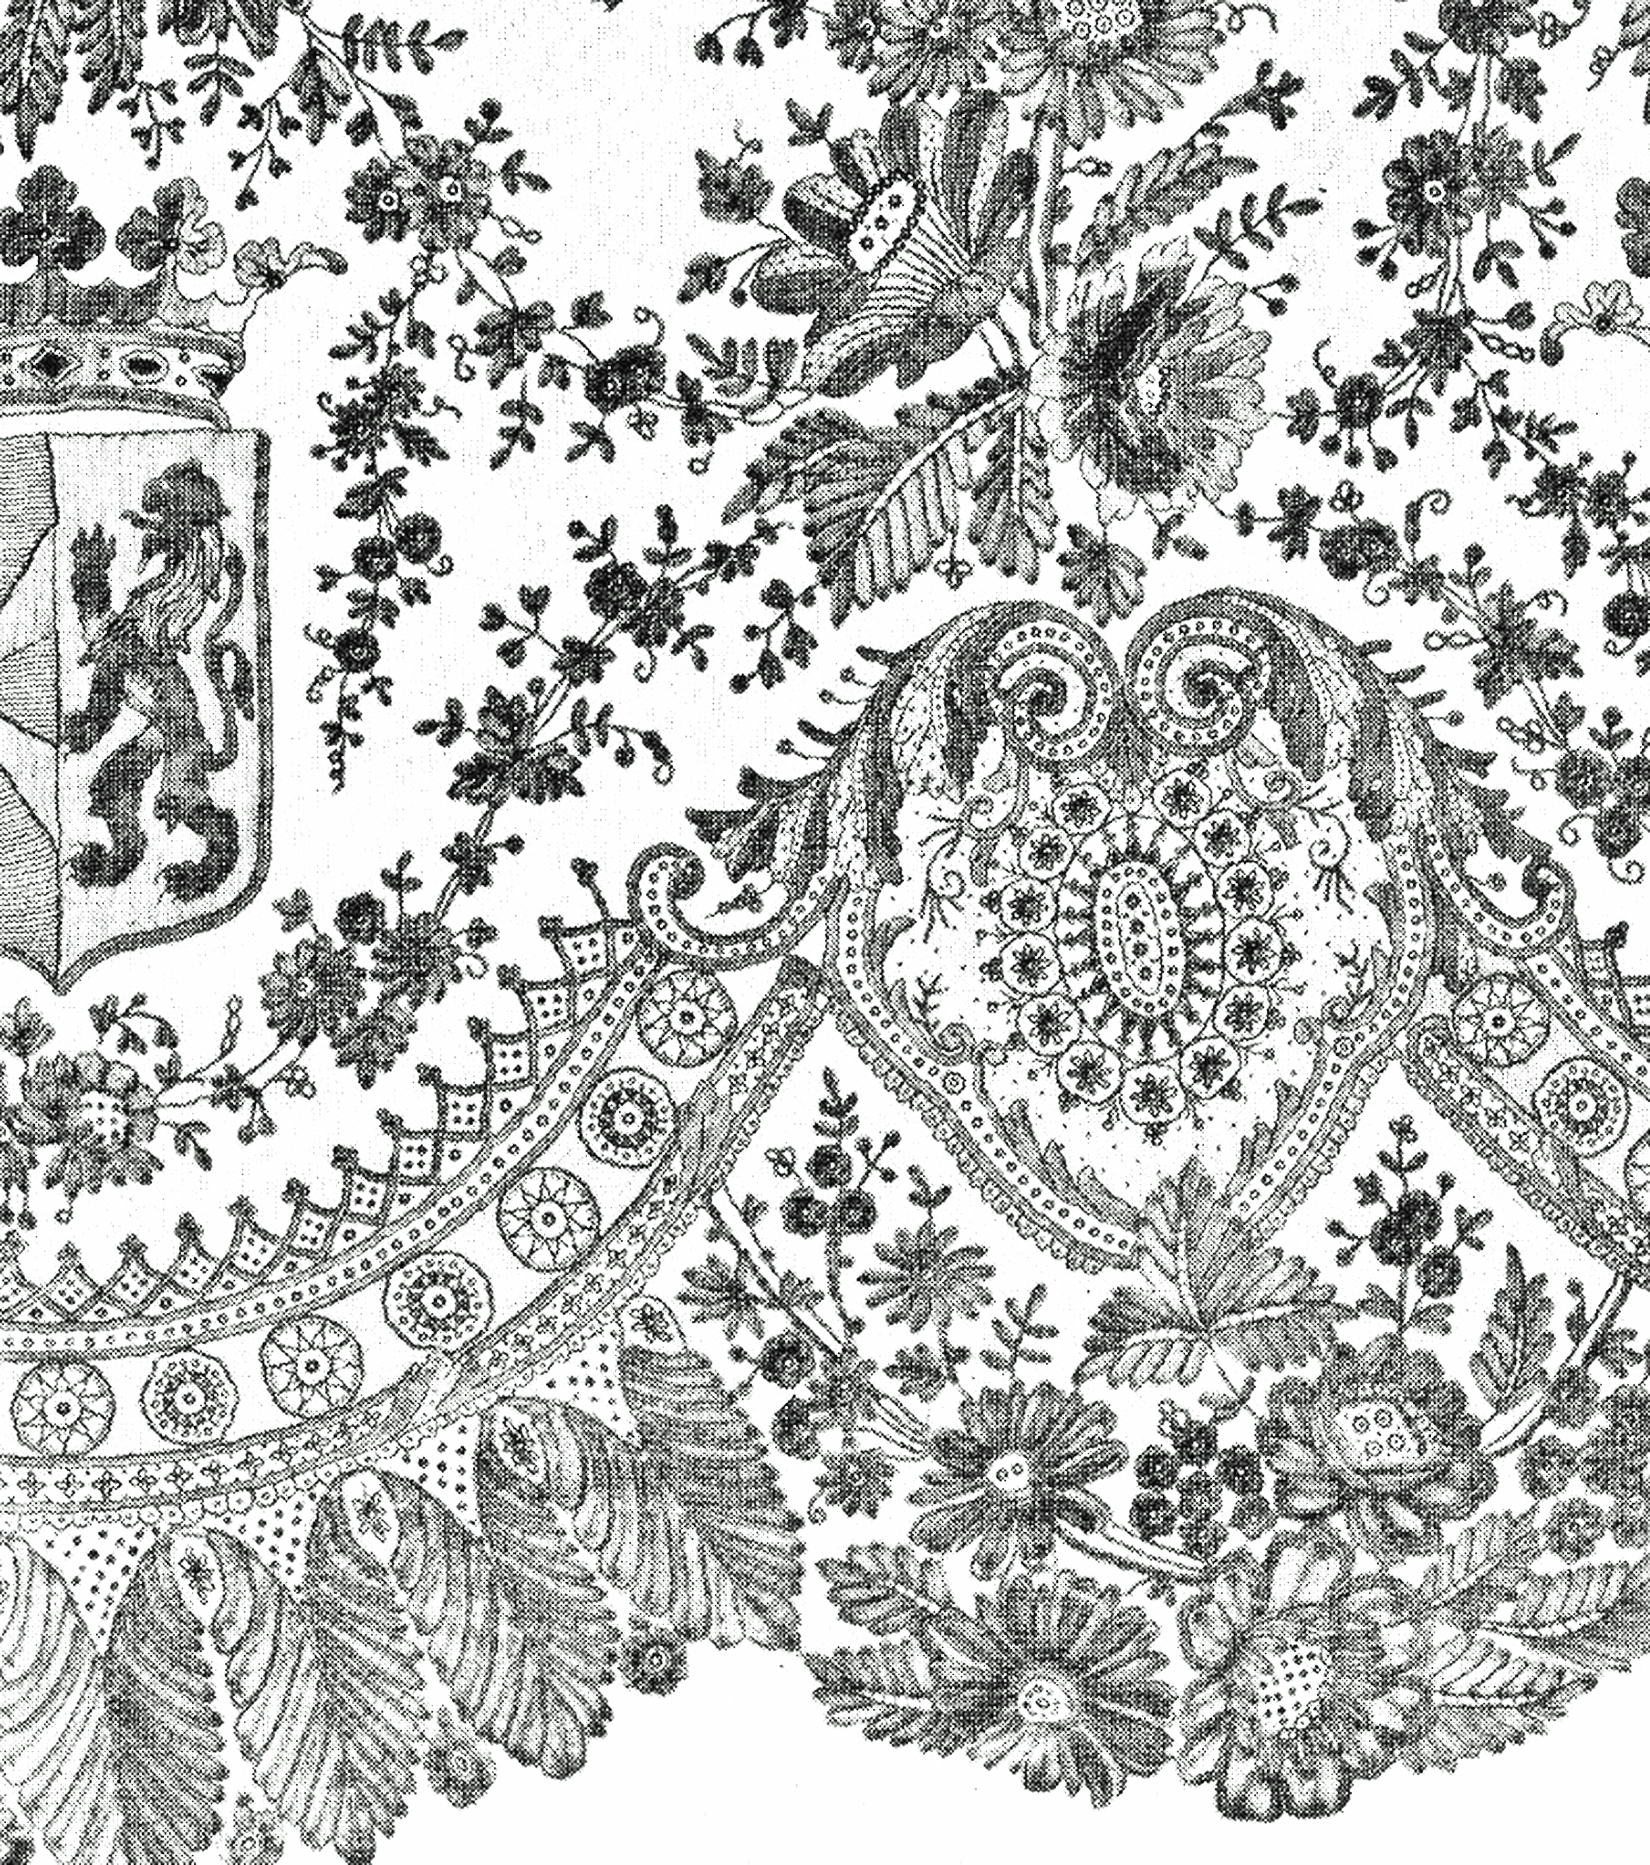 These Are Public Domain Image Of Waaay Old Antique Lace I Ve